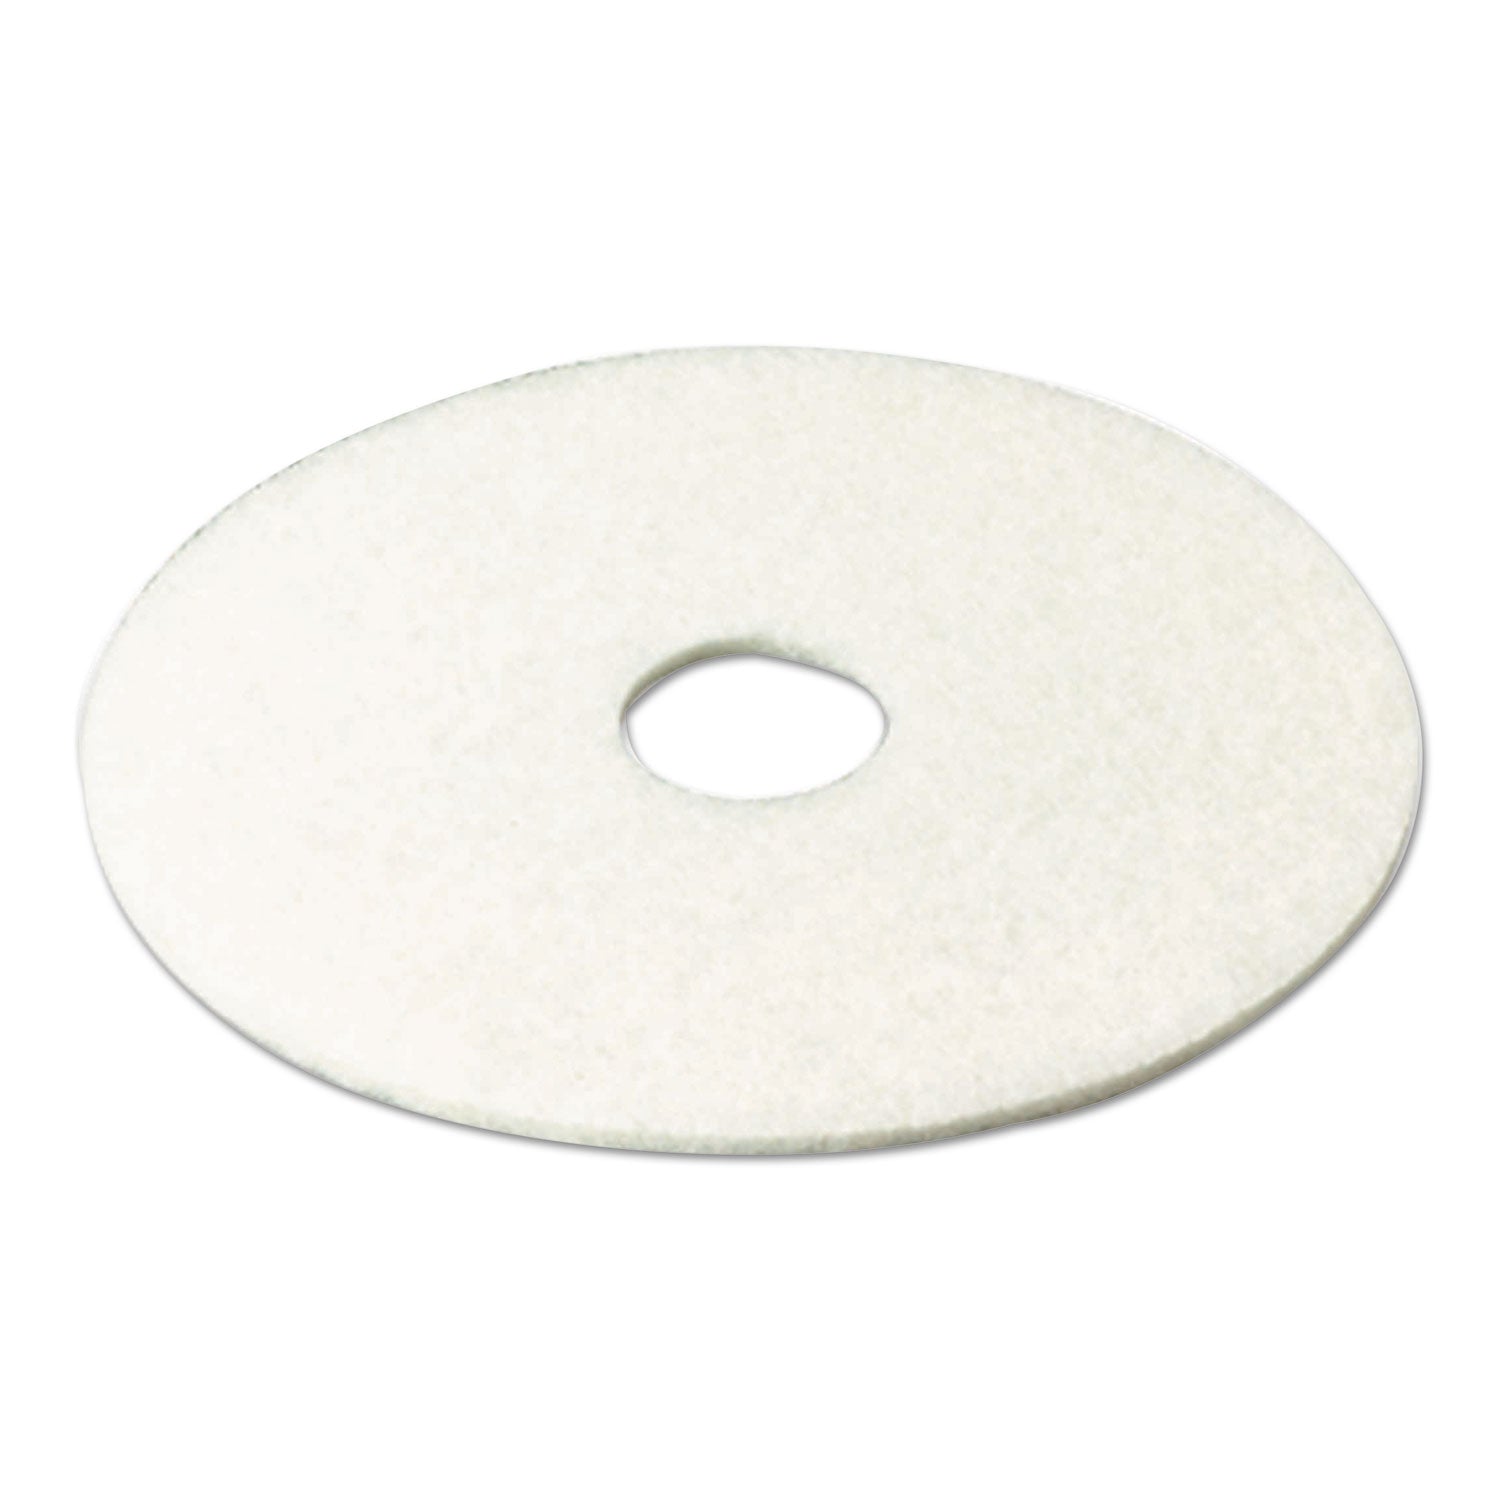 3M White Super Polish Pads - 5/Carton - Round x 12" Diameter - Polishing, Floor, Buffing, Scrubbing - Wood Floor - 175 rpm to 600 rpm Speed Supported - Textured, Adhesive, Durable, Scuff Mark Remover, Heel Mark Remover - Polyester Fiber - White - 2